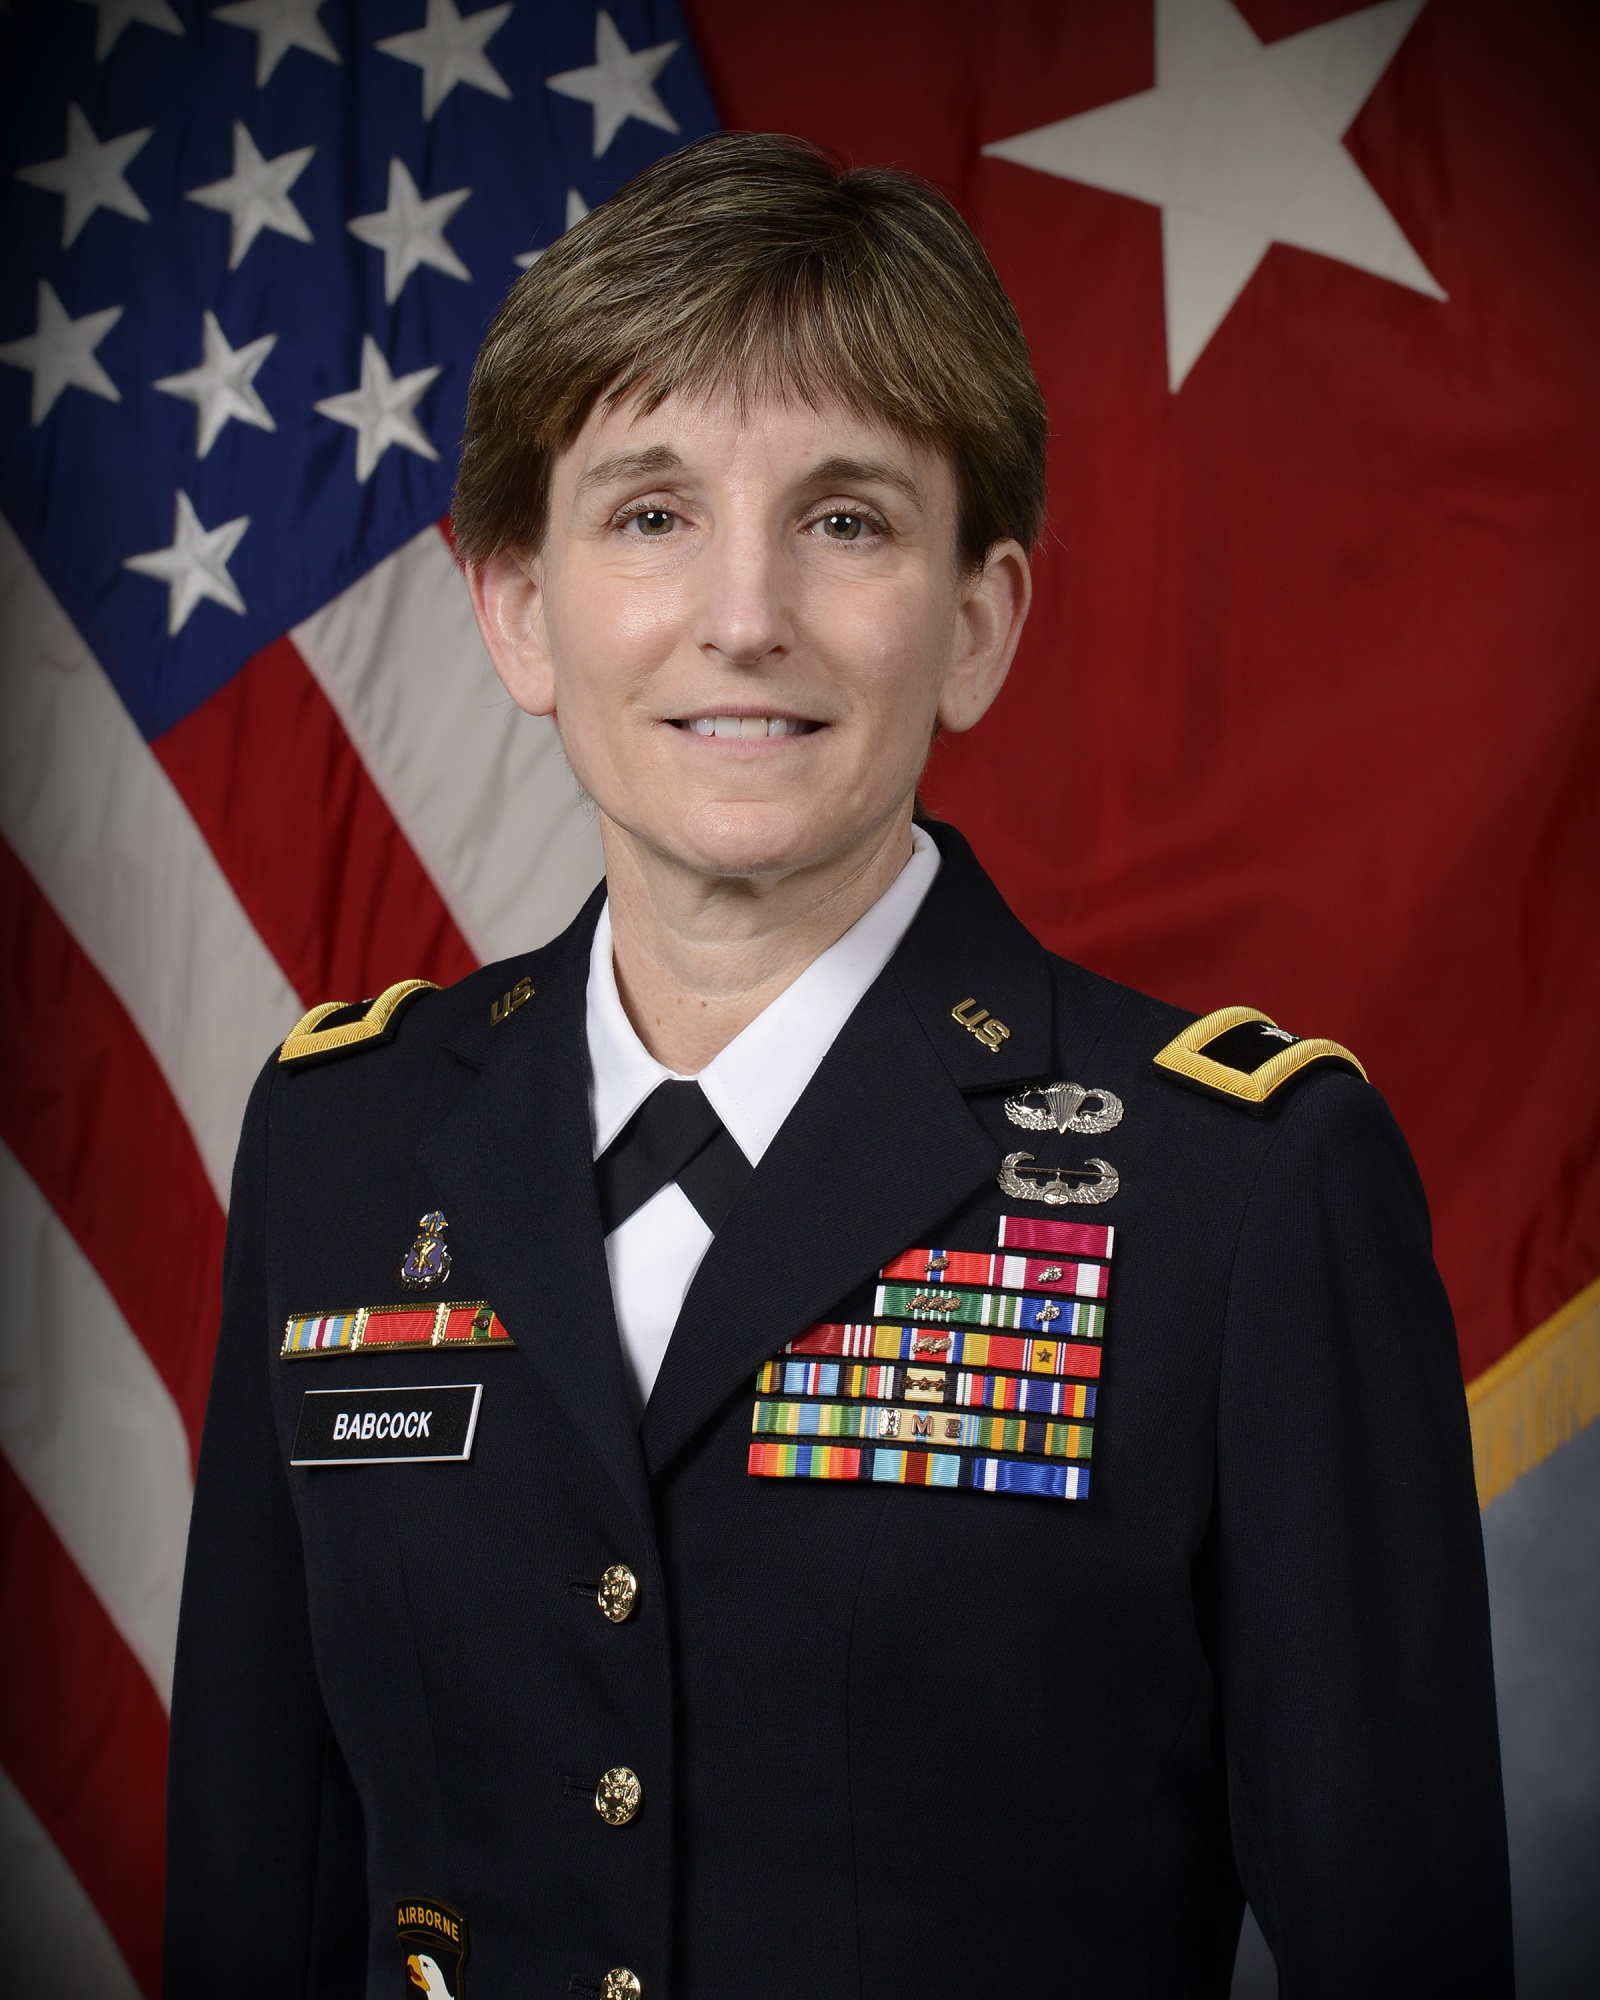 File:Stacy M. Babcock (2).jpg - Wikimedia Commons